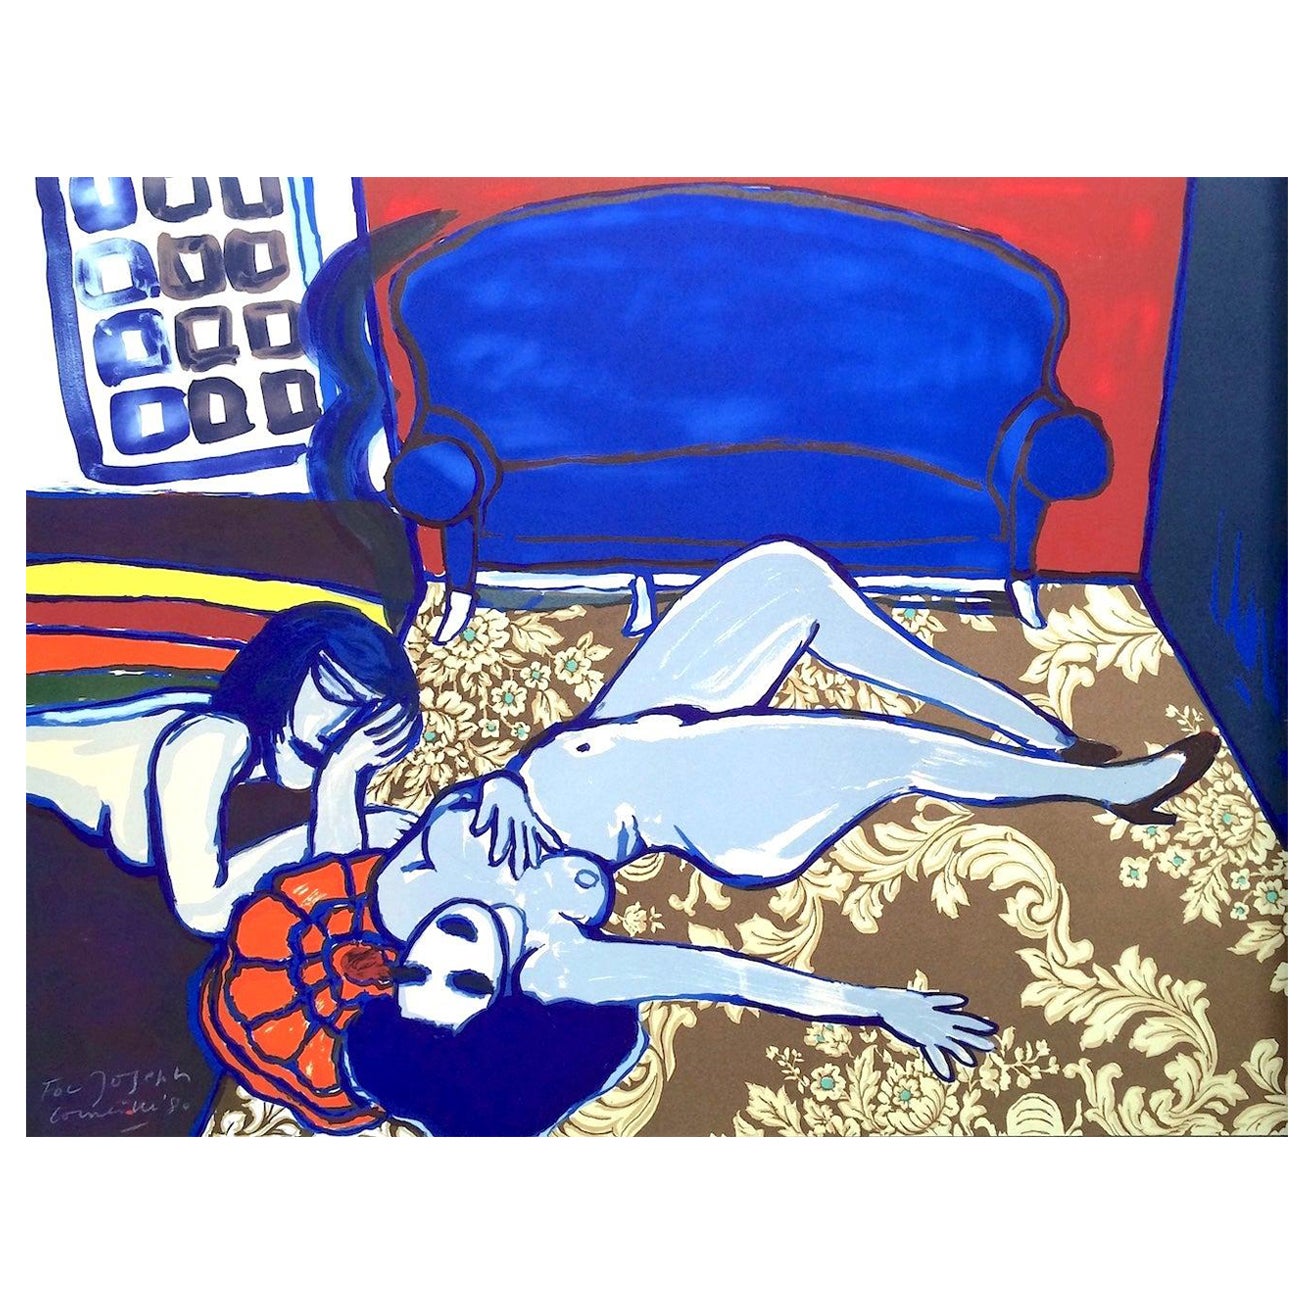 DEUX AMIES Signed Hand Drawn Lithograph, Female Nudes, Blue Sofa, Floral Rug